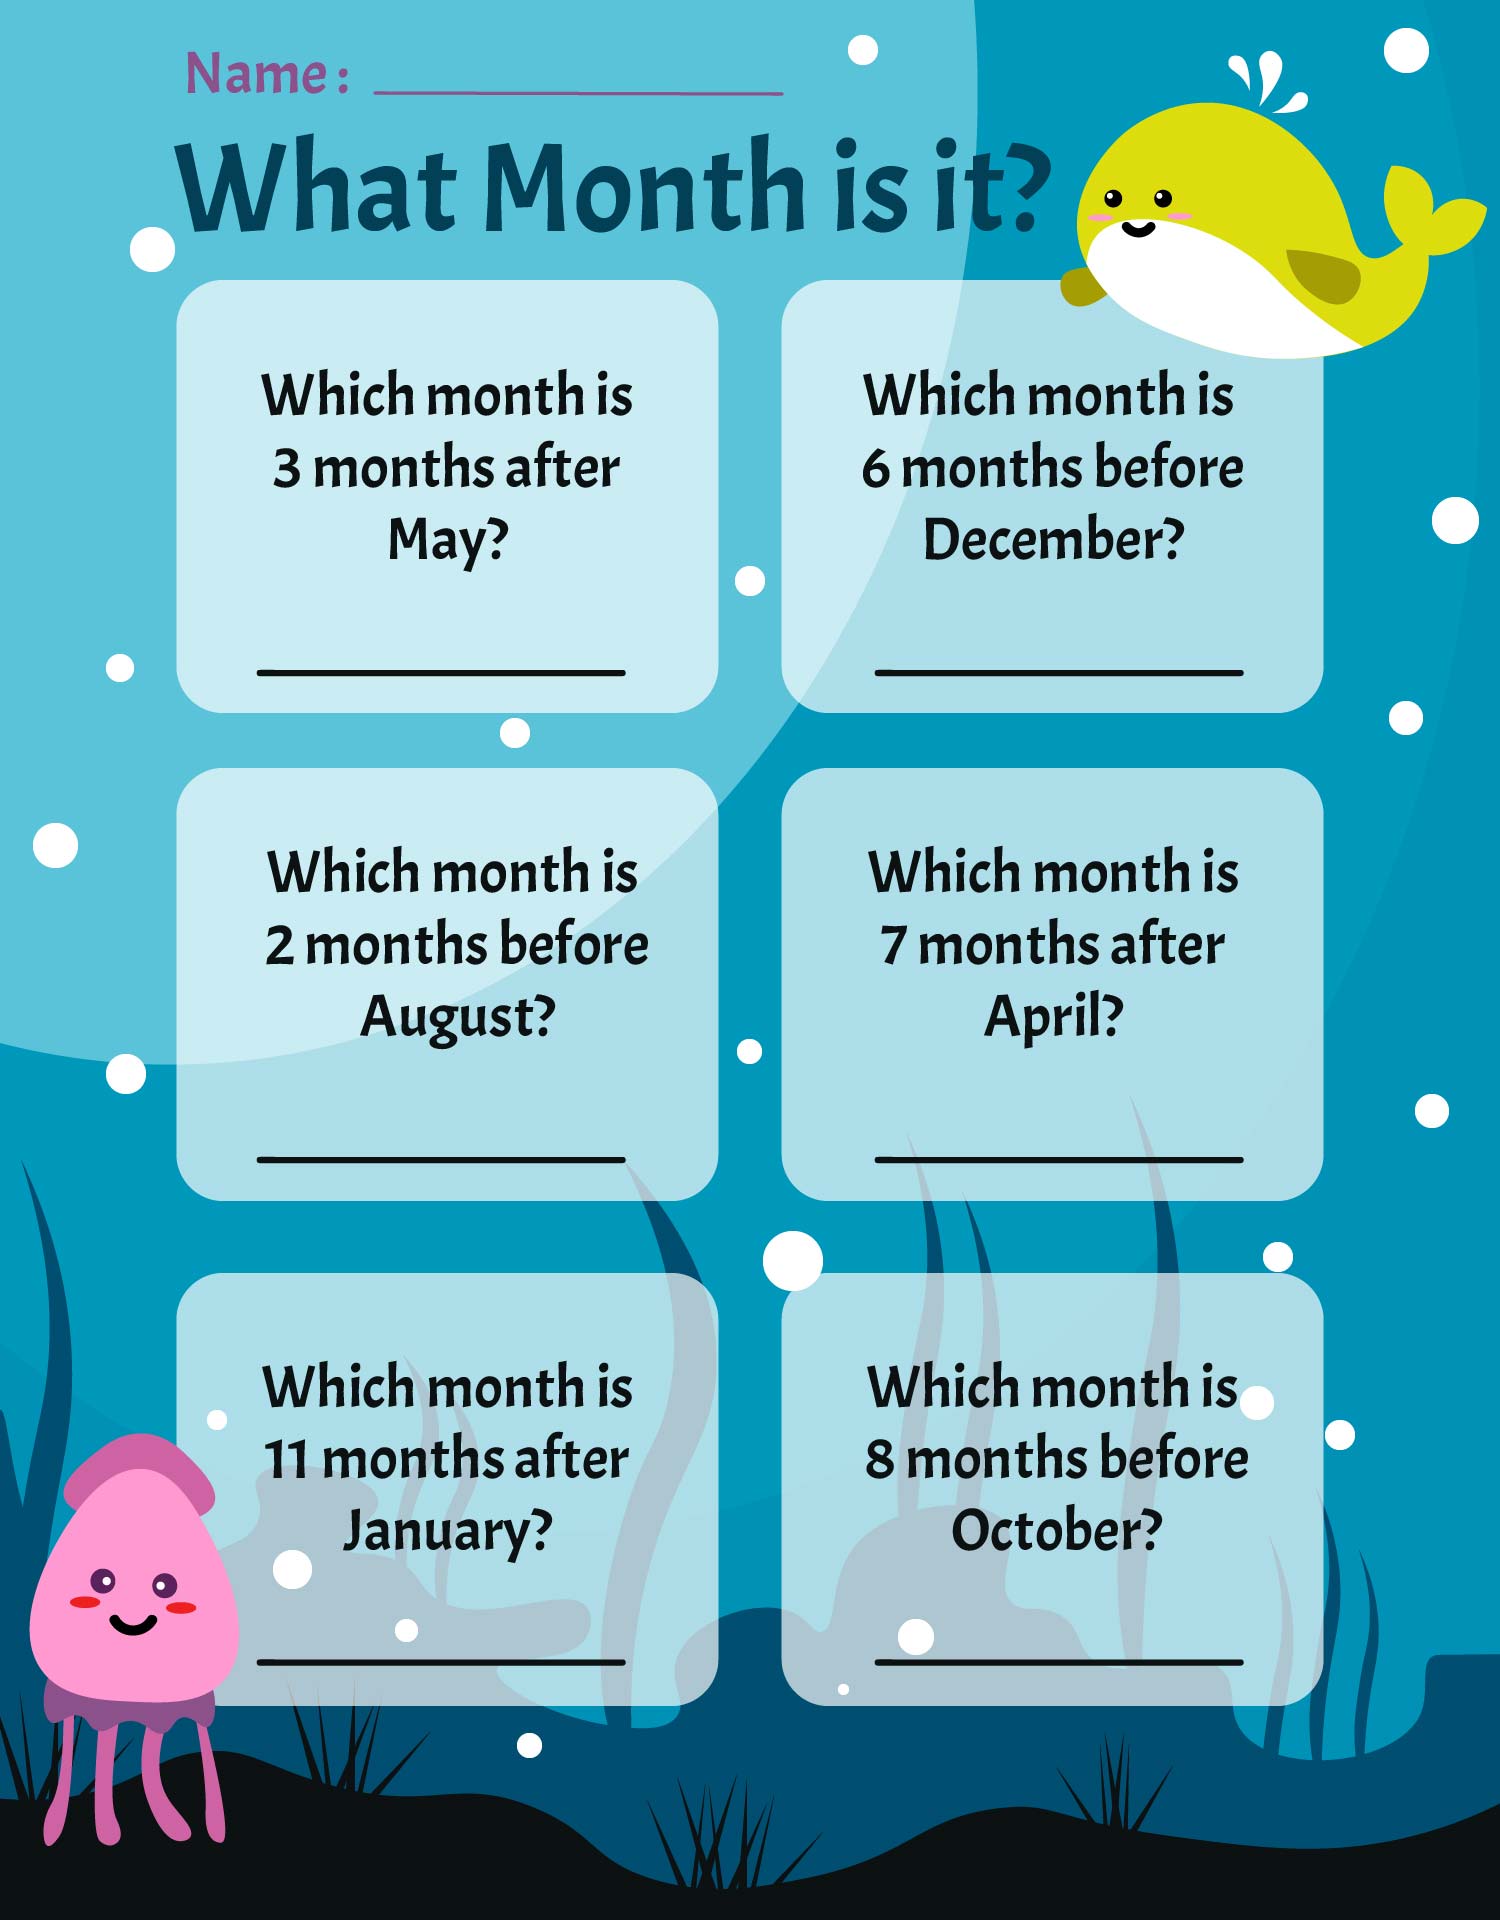 Printable Months of the Year Worksheets